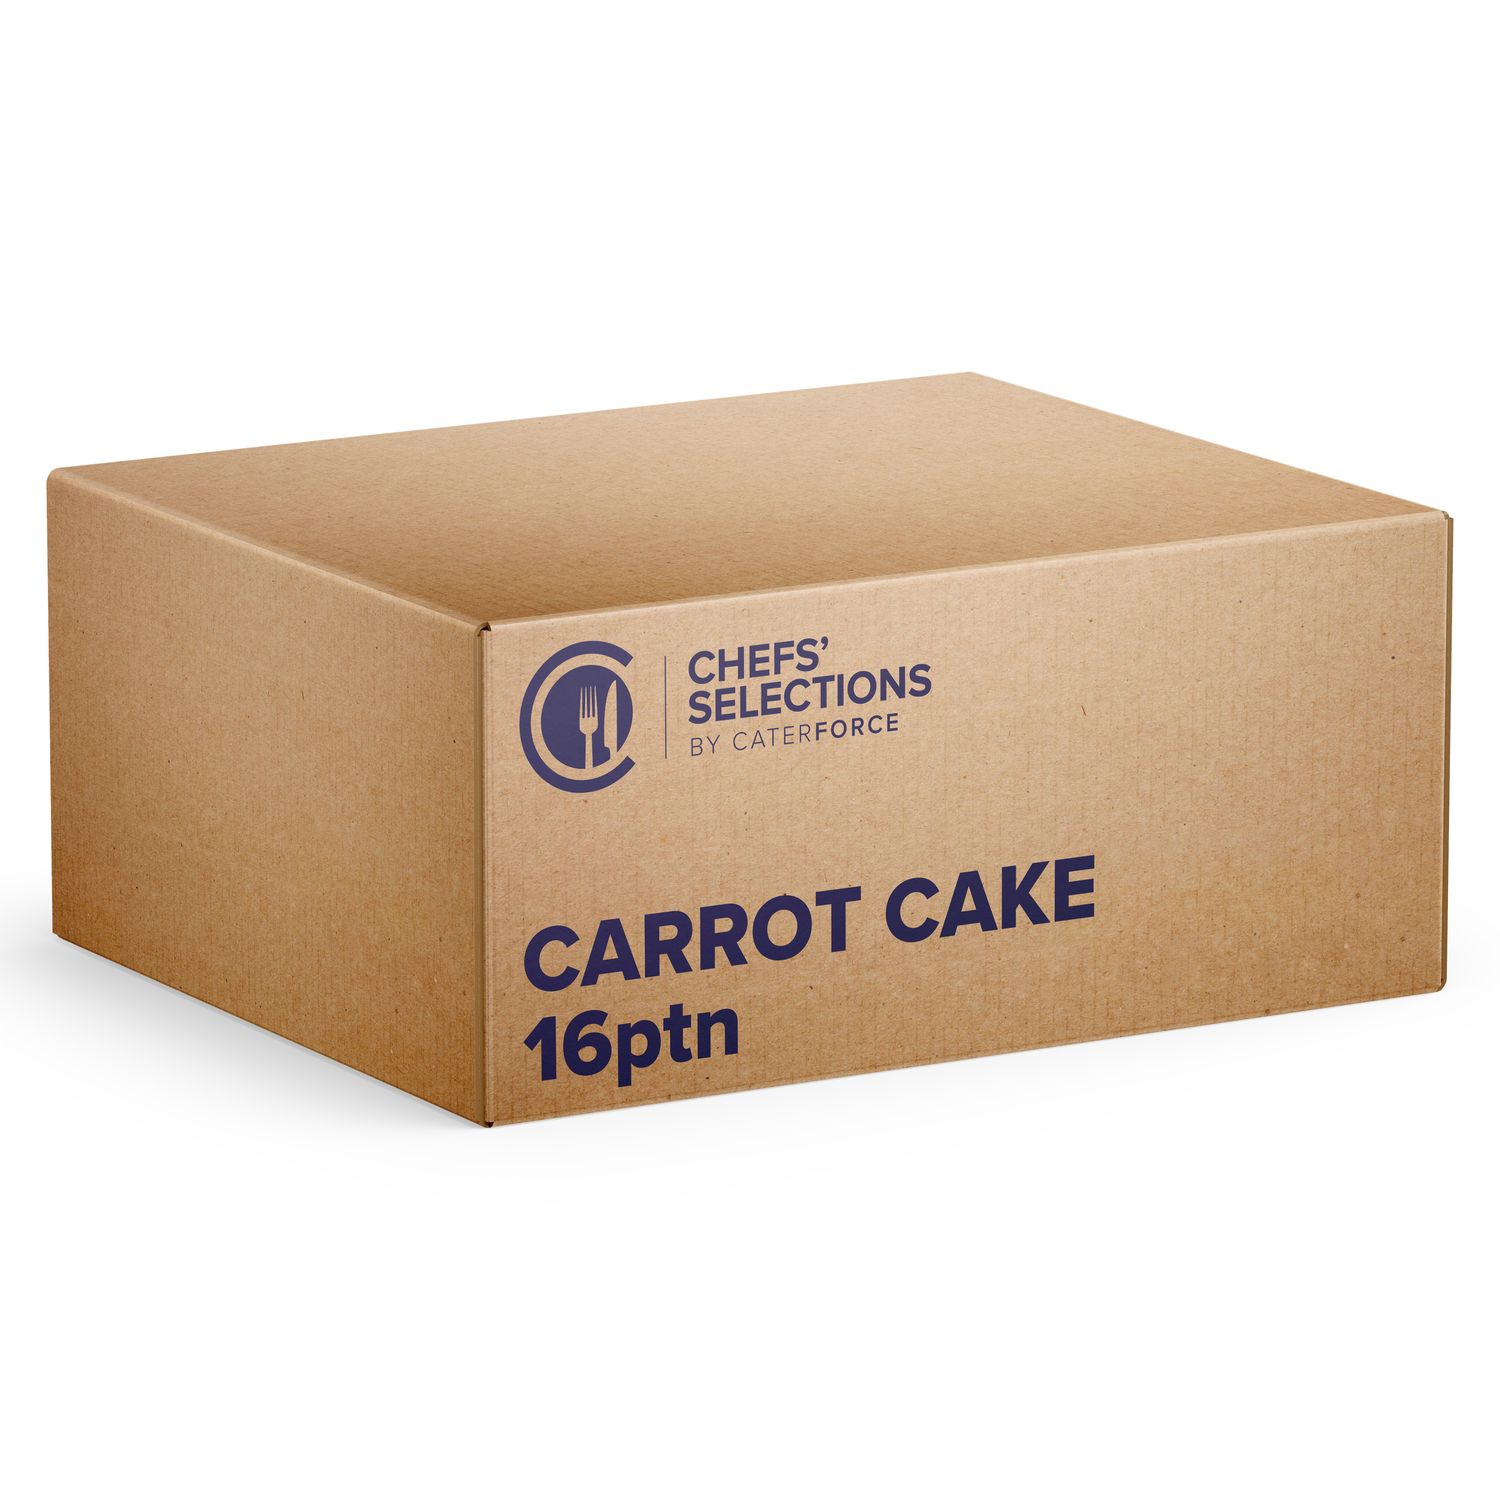 Chefs’ Selections Carrot Cake (1 x 16p/ptn)